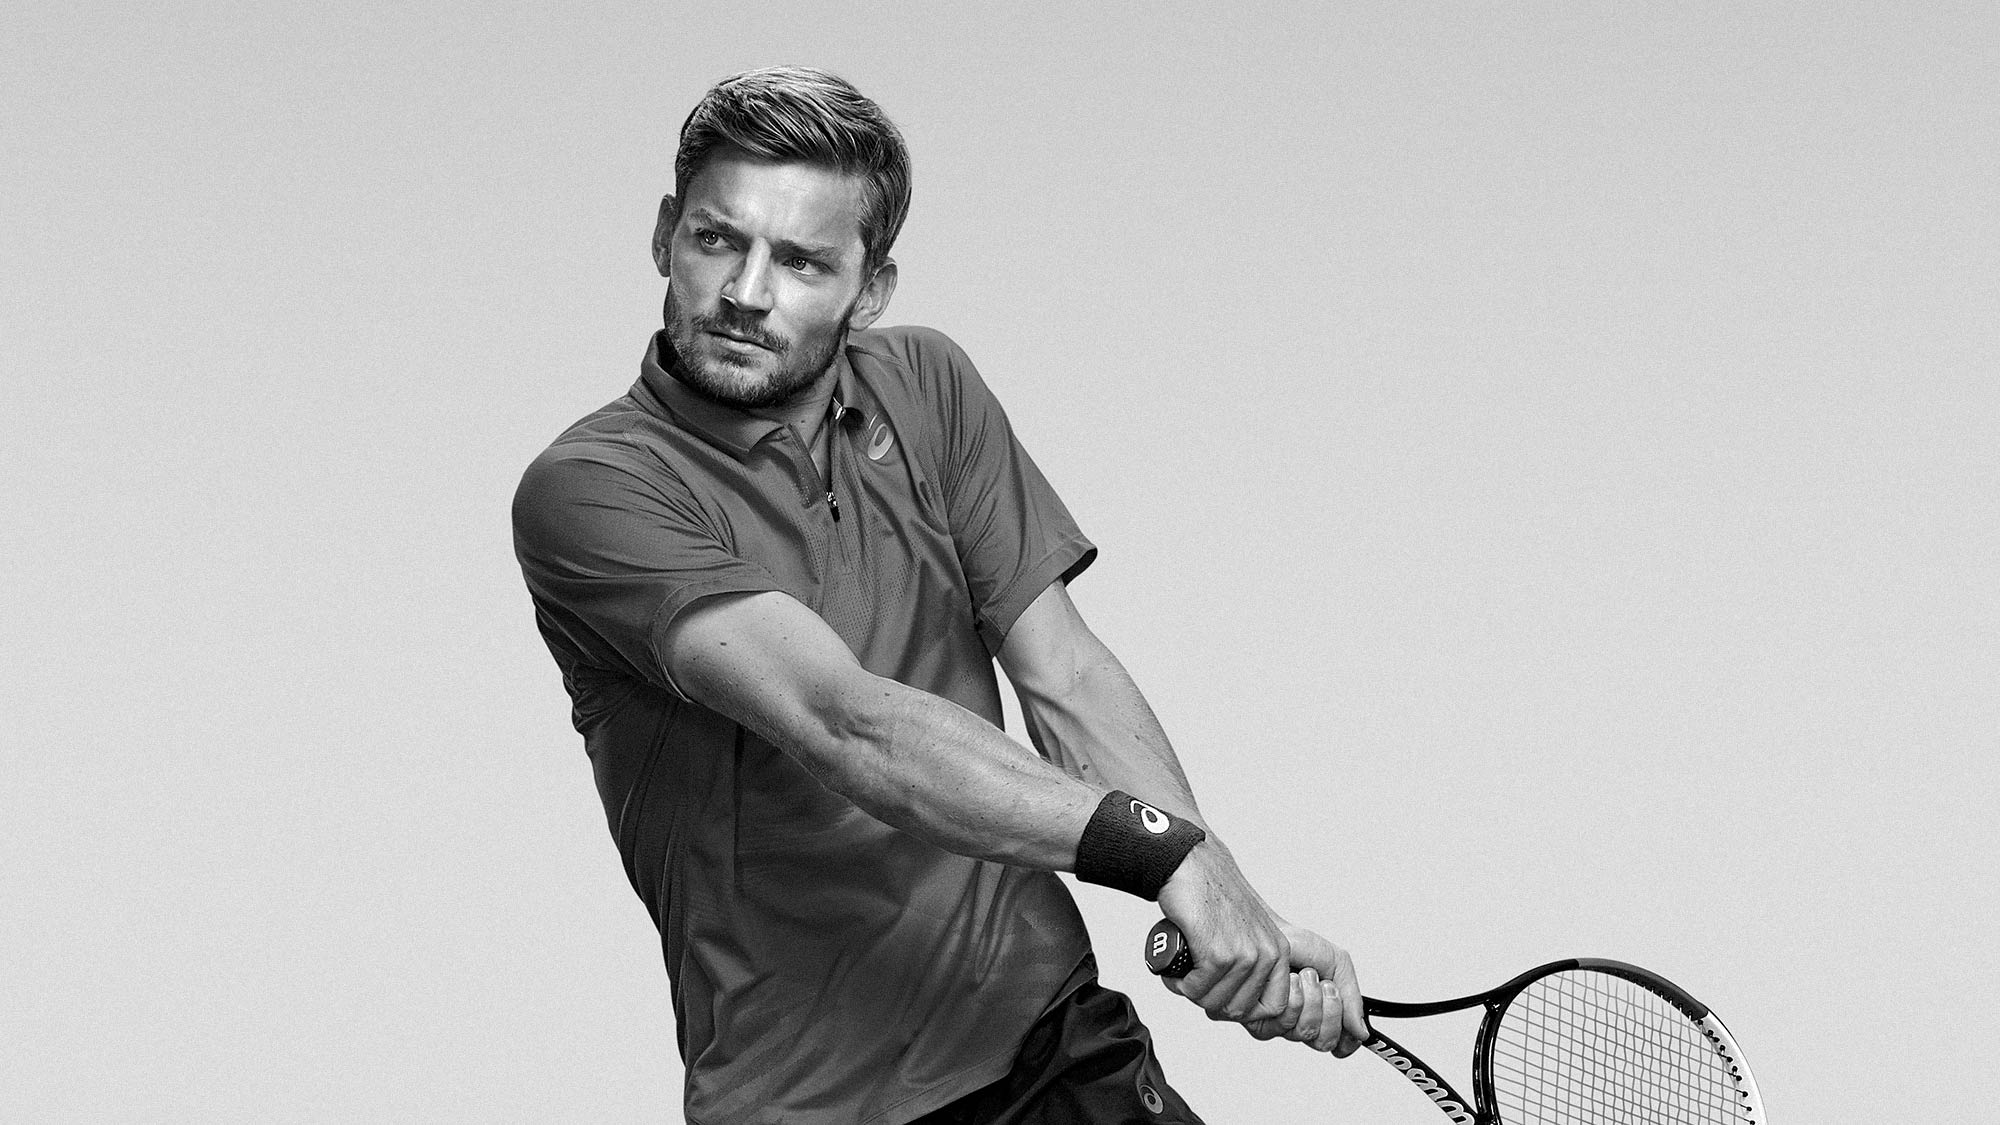 Action image of David Goffin leaping into a back hand tennis shot. Commercial imagery for ASICS Europe